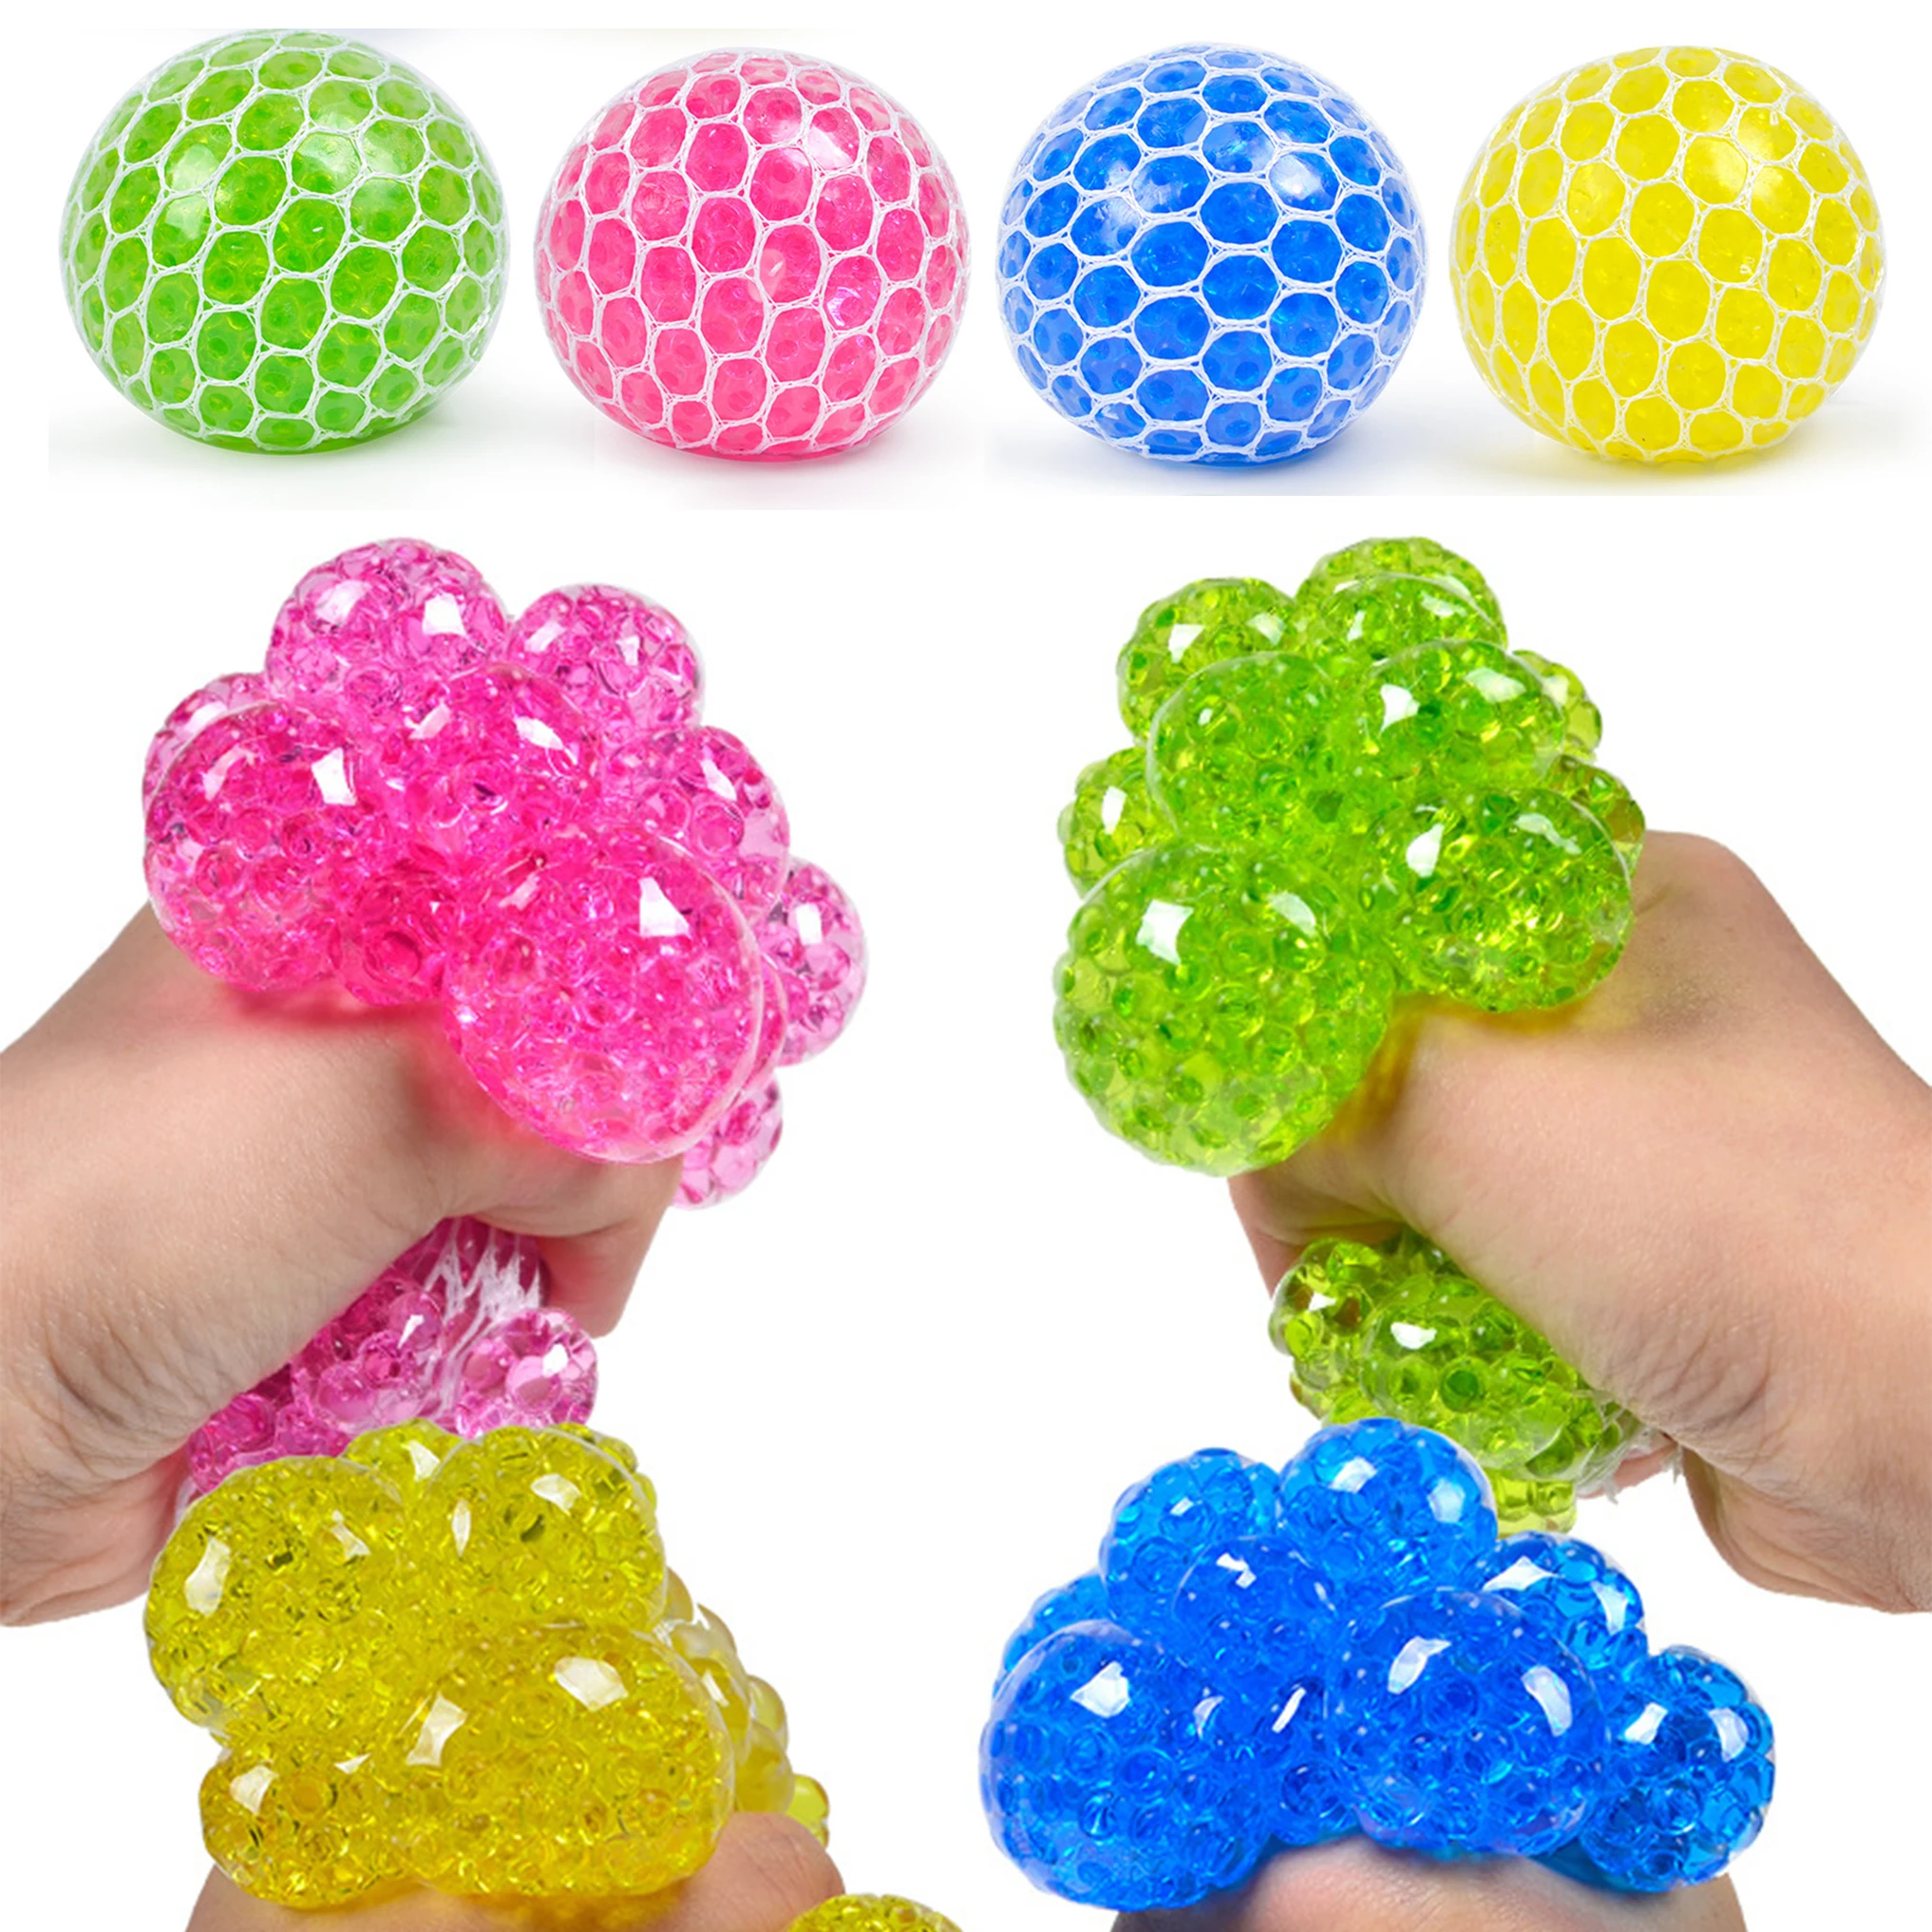 

7cm Soft Squishy Mesh Grape Ball Stop Stress Antistress Reliever Autism Mood Squeeze Relief Fidgets Geek Gadget Beads Vent Toy